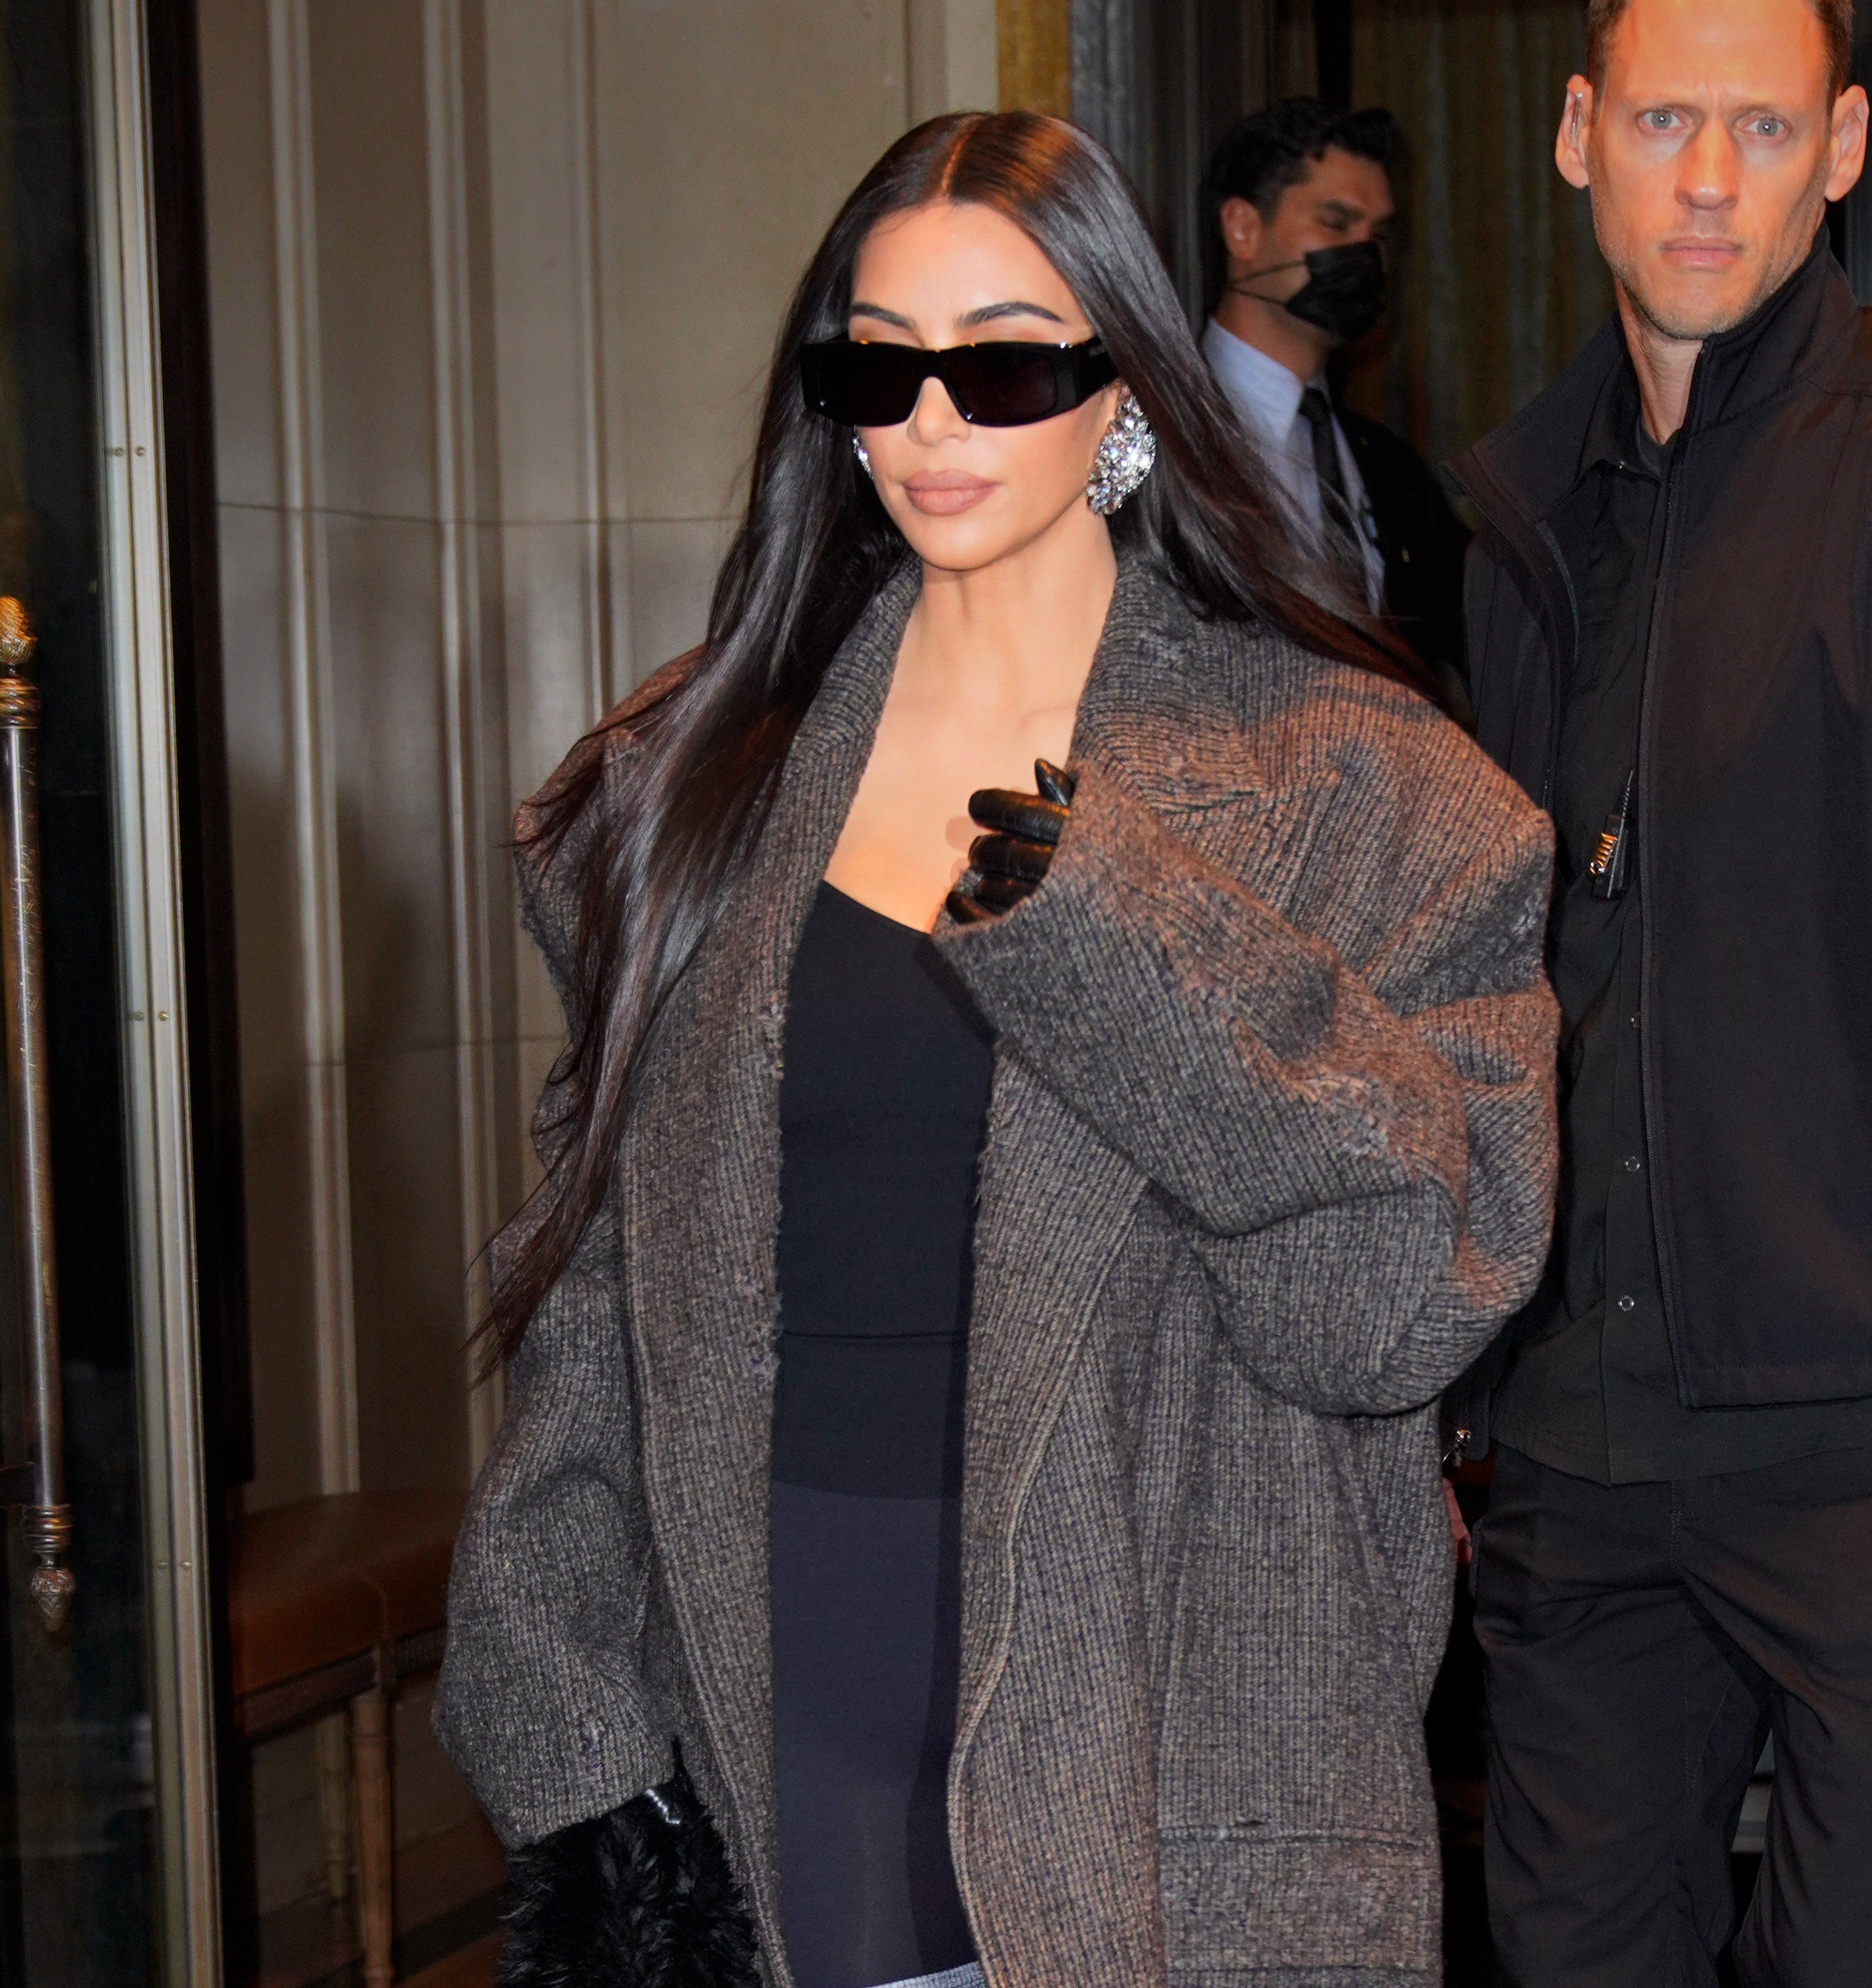 Kim walking out of a building wearing a large coat and sunglasses